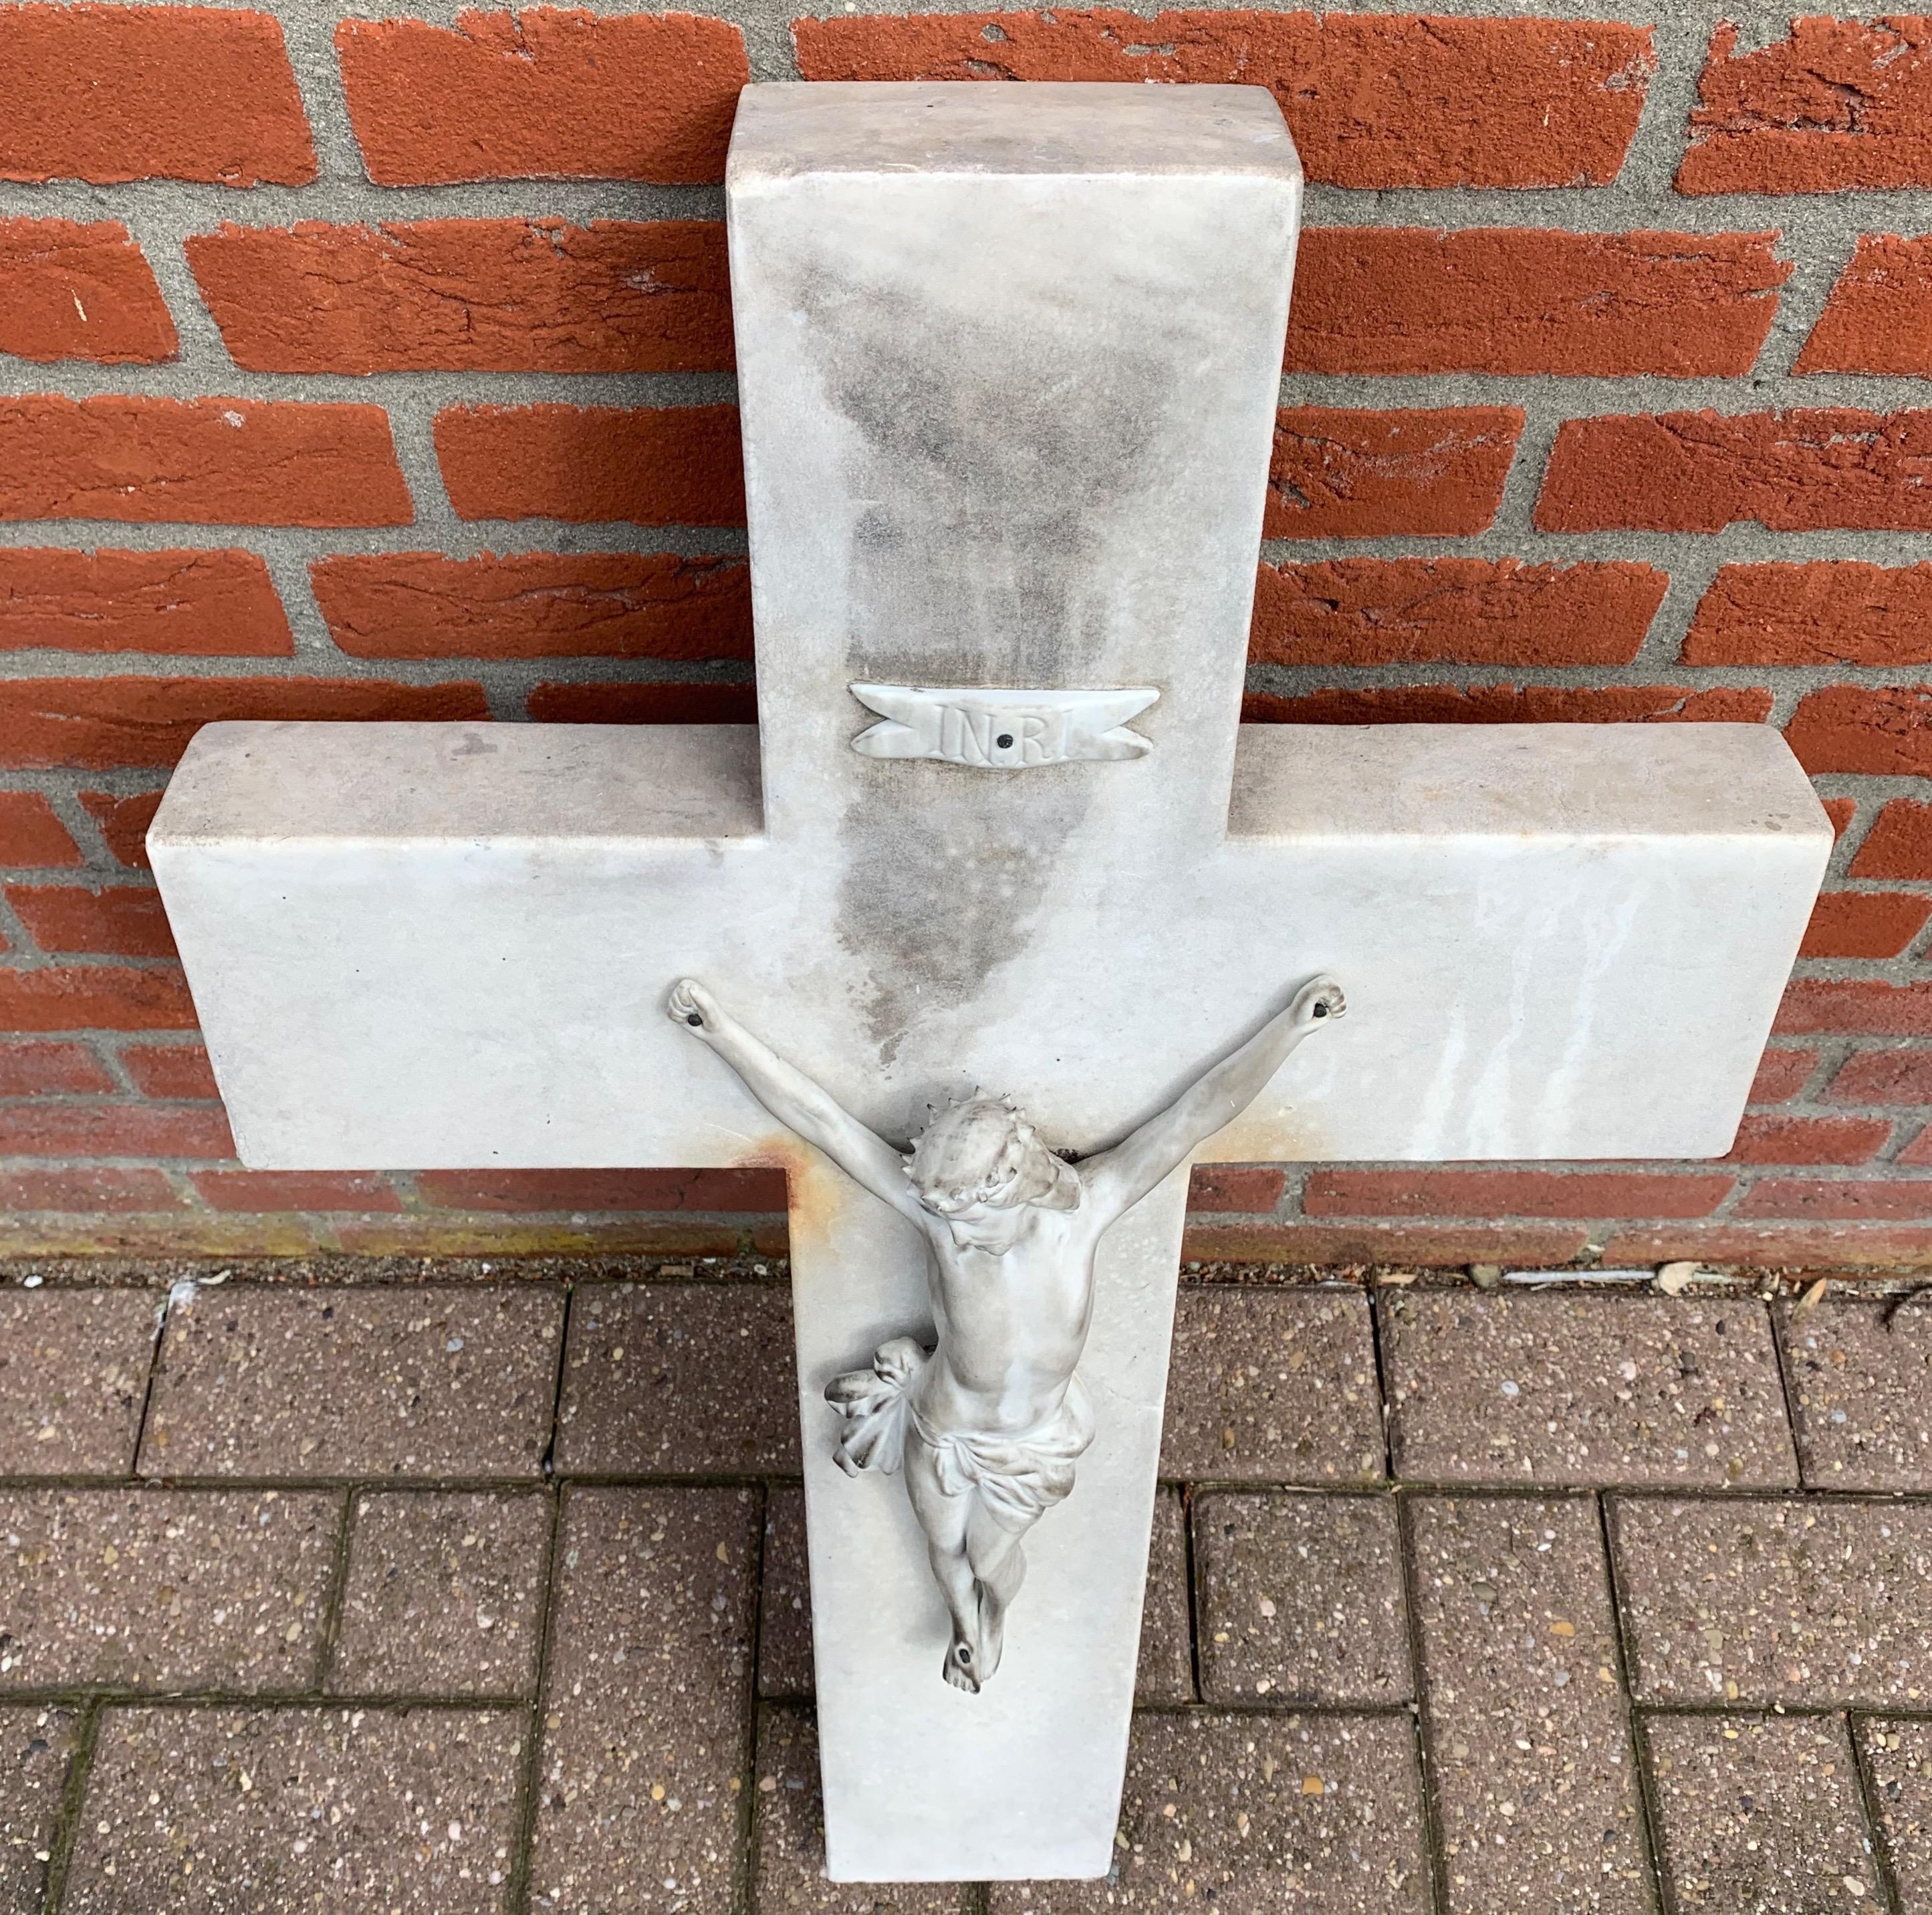 Early 1900s Hand Carved Marble Crucifix / Wall Cross with Jesus Christ Sculpture 5